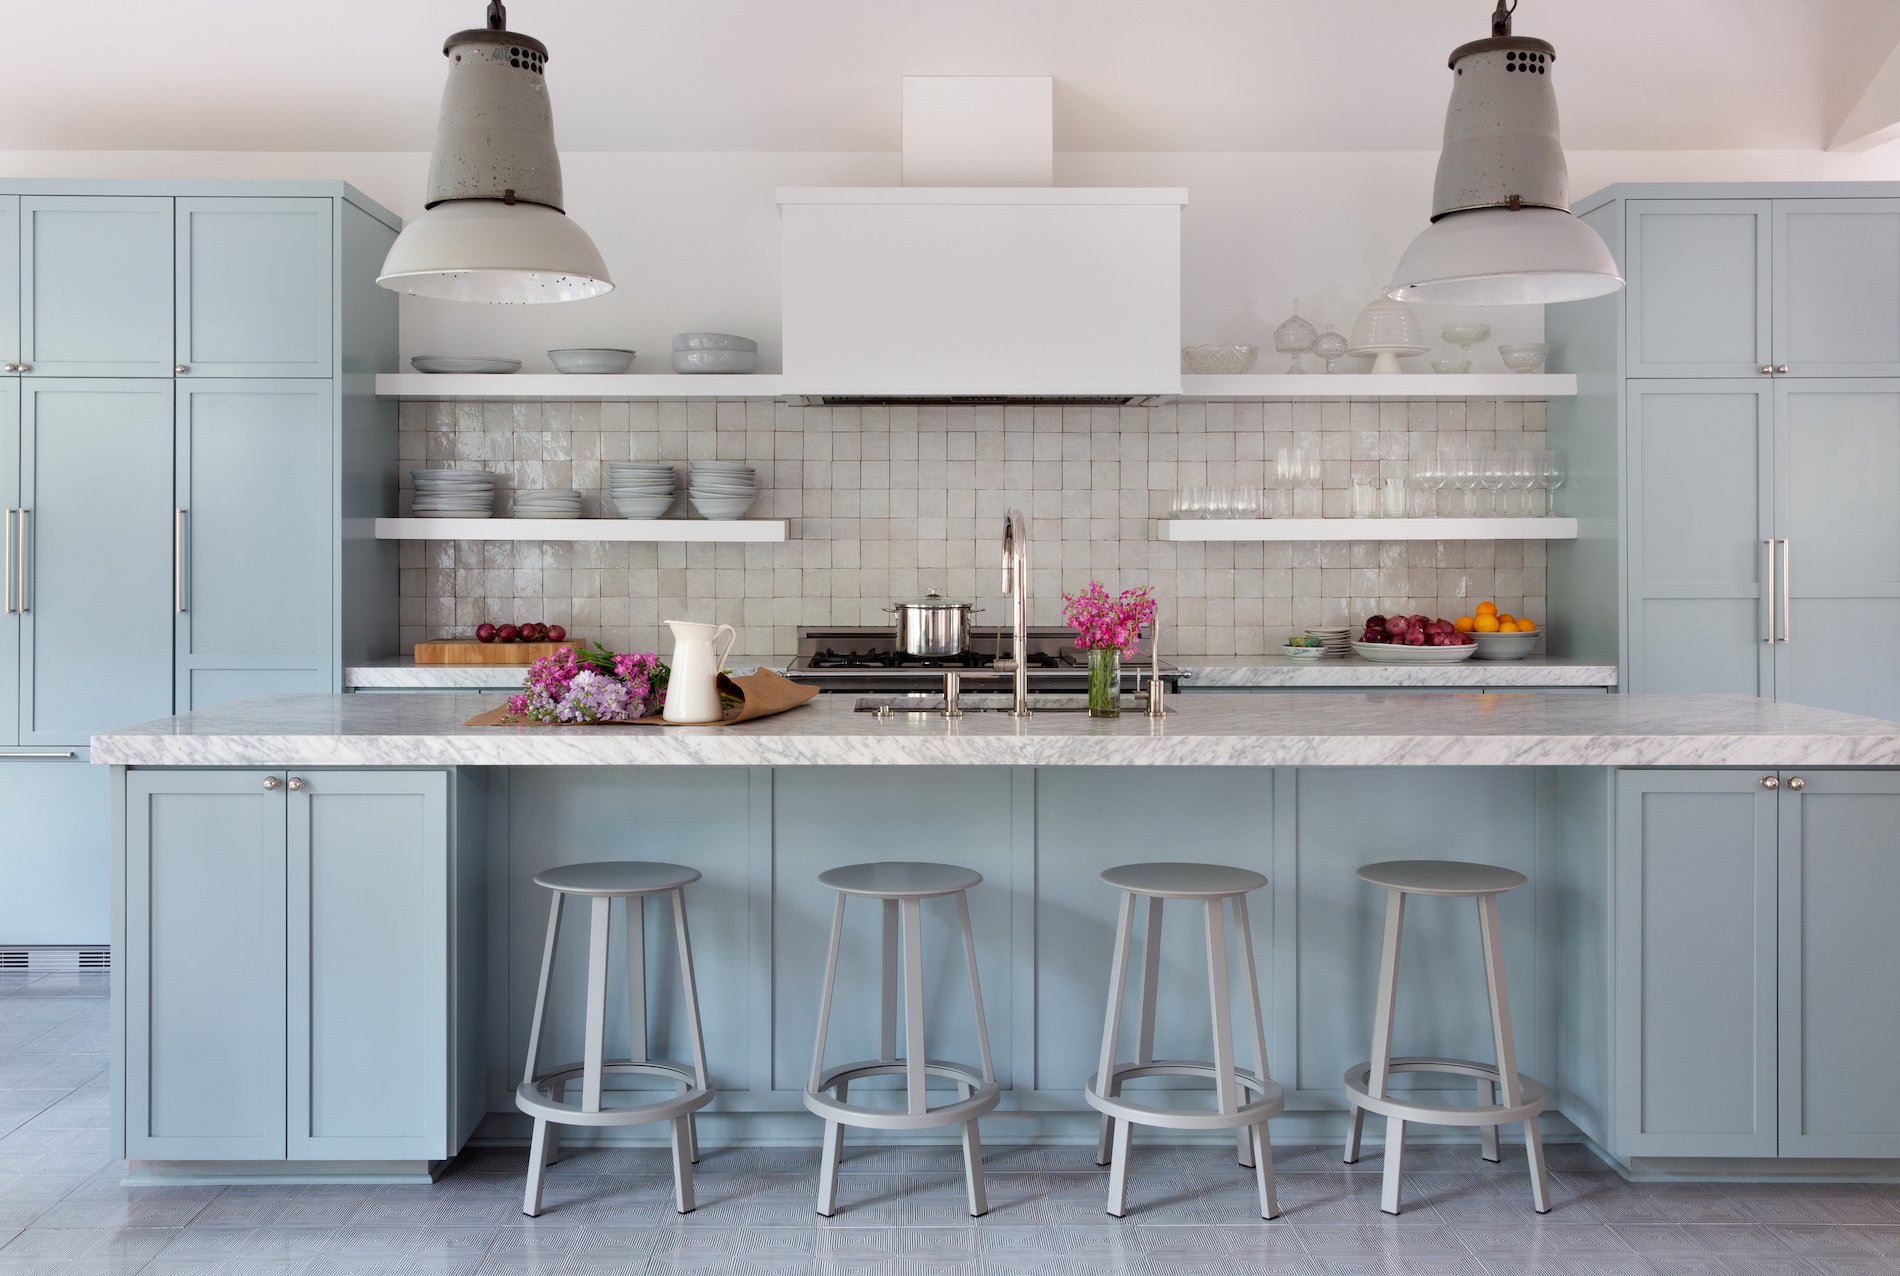 Prepare Your Pinterest Boards—These 11 Kitchen Islands Couldn't Be More Perfect